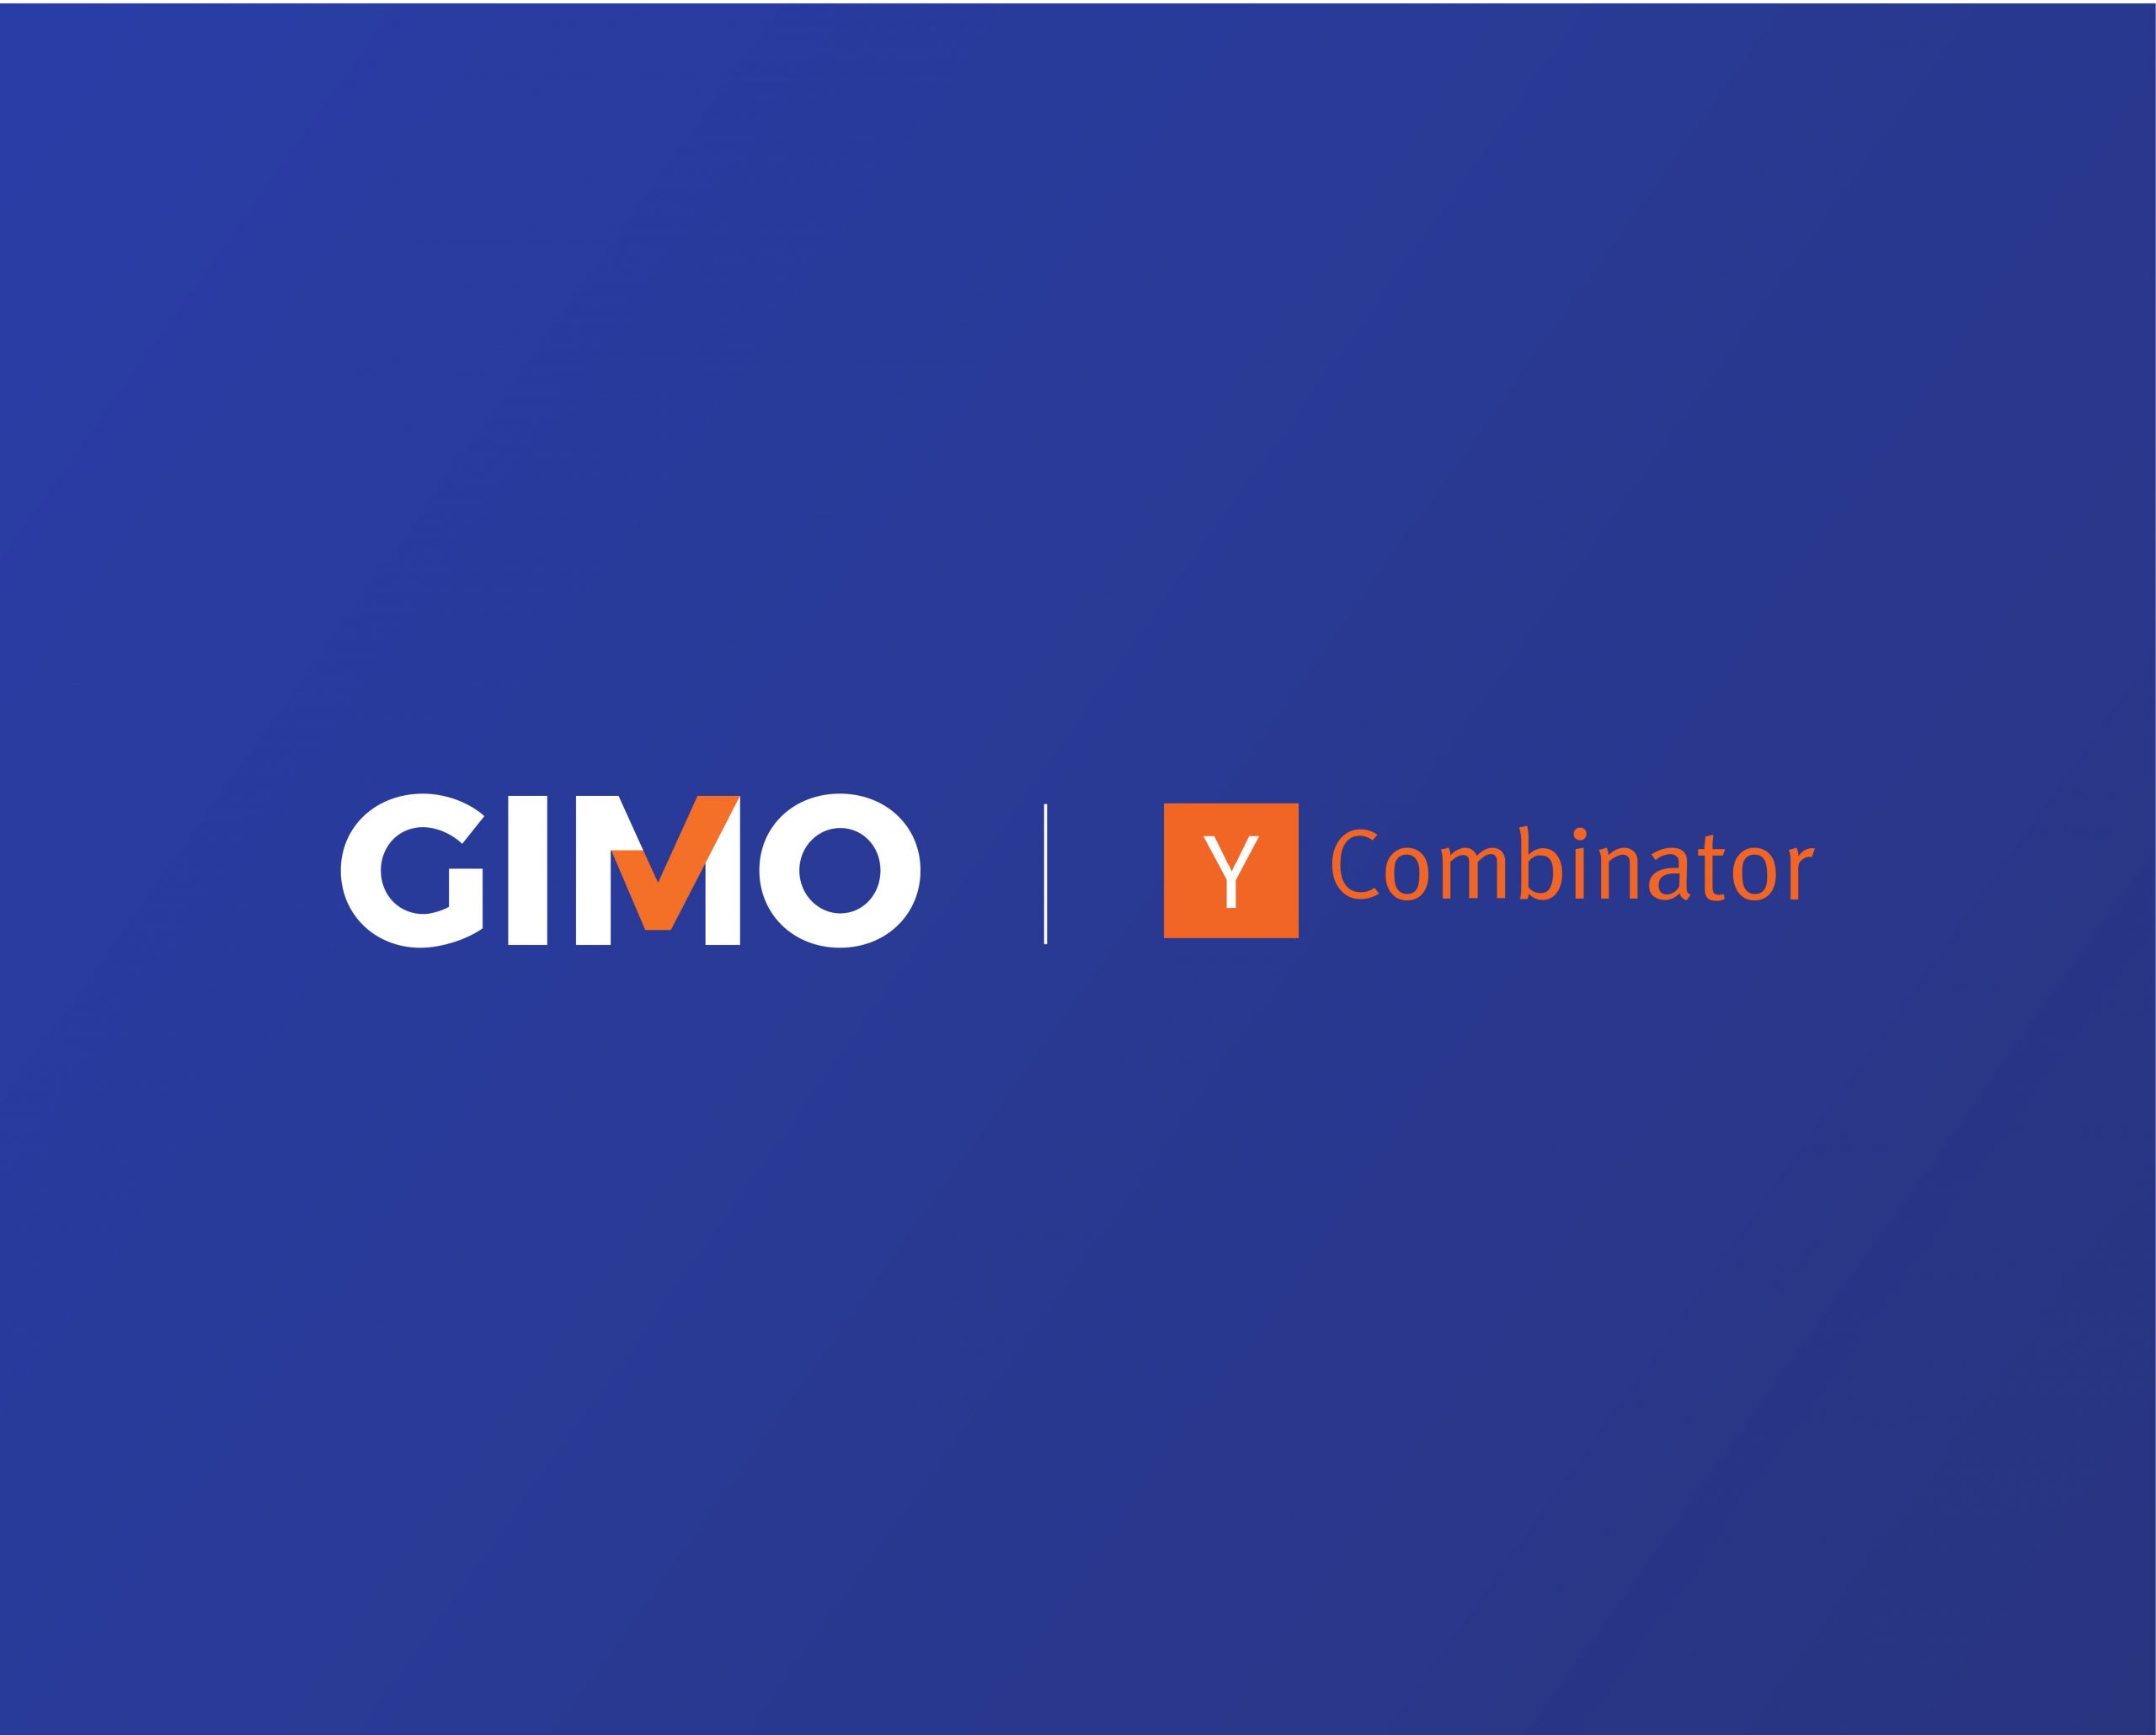 GIMO backed by Silicon Valley’s Y Combinator